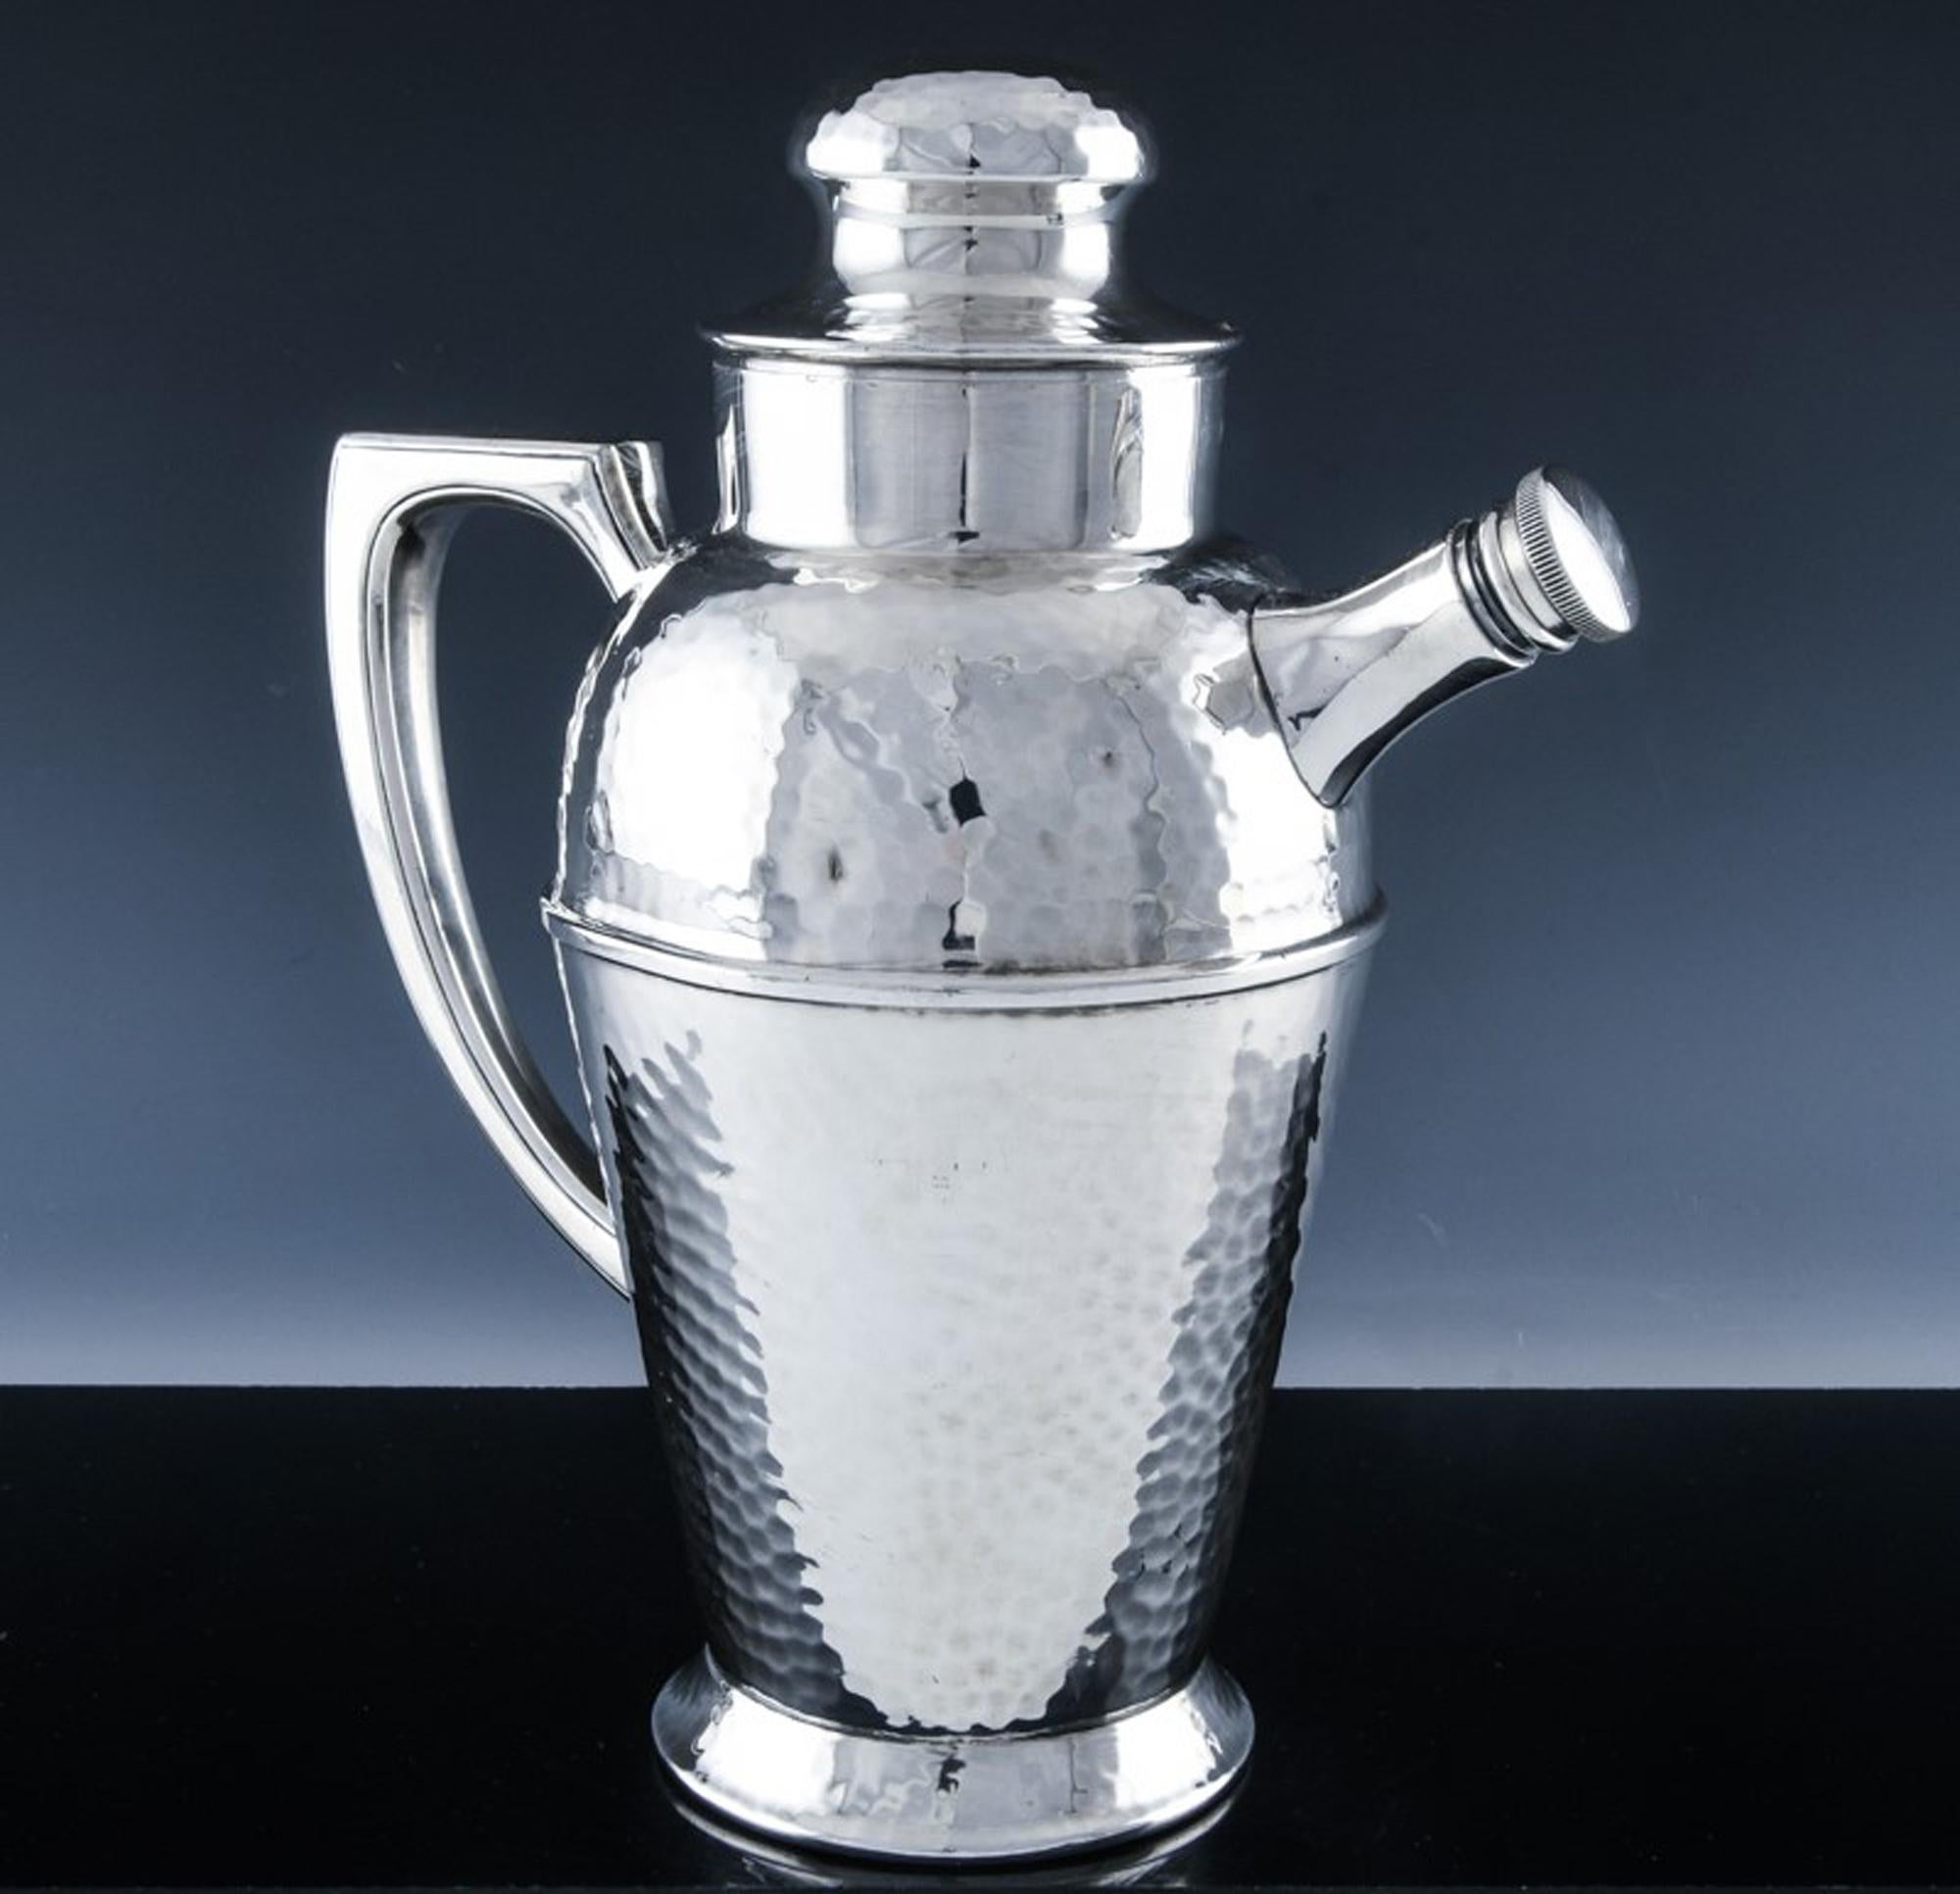 Art Deco silver plate cocktail and Martine shaker and pitcher,
1940

This cocktail shaker is a very fine quality silver plate example. The body is hammered and has an Art Deco form. The interior has a wide perforated lip so one can make your